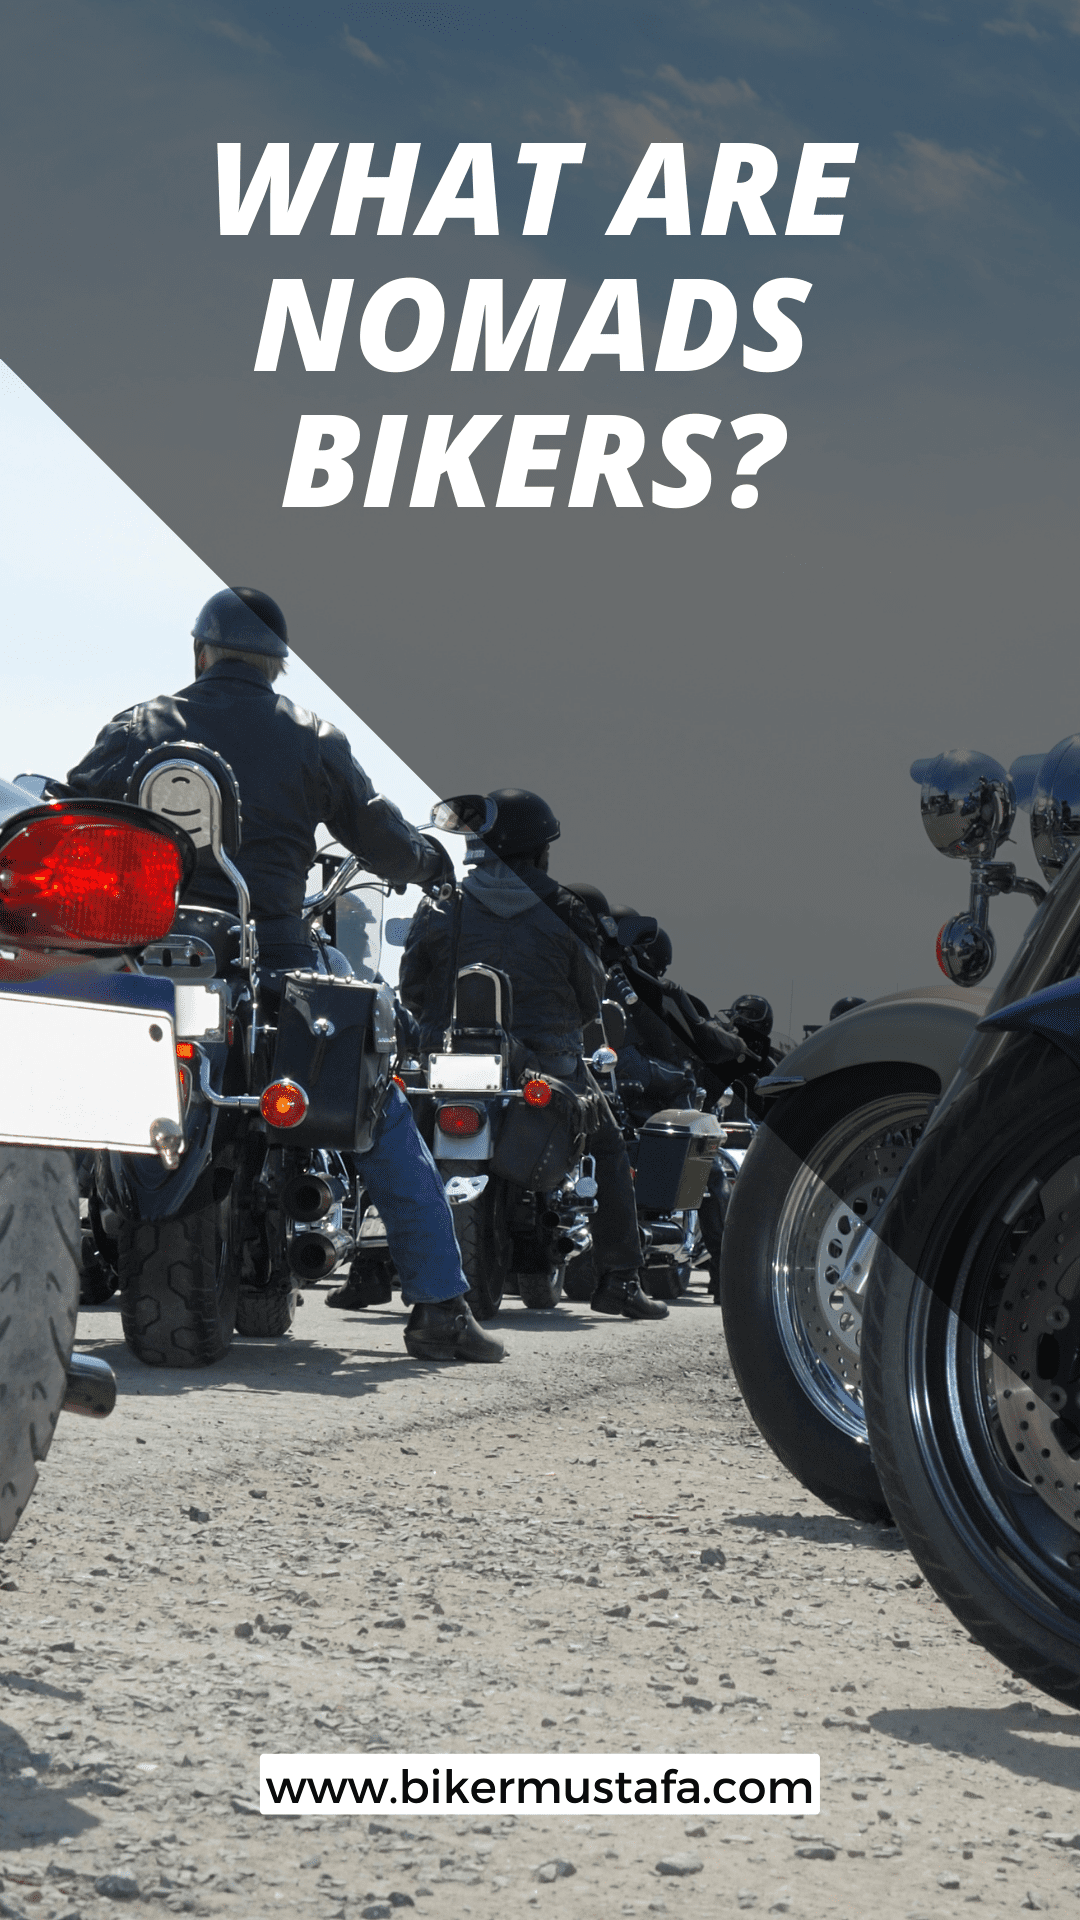 What Are Nomads Bikers?